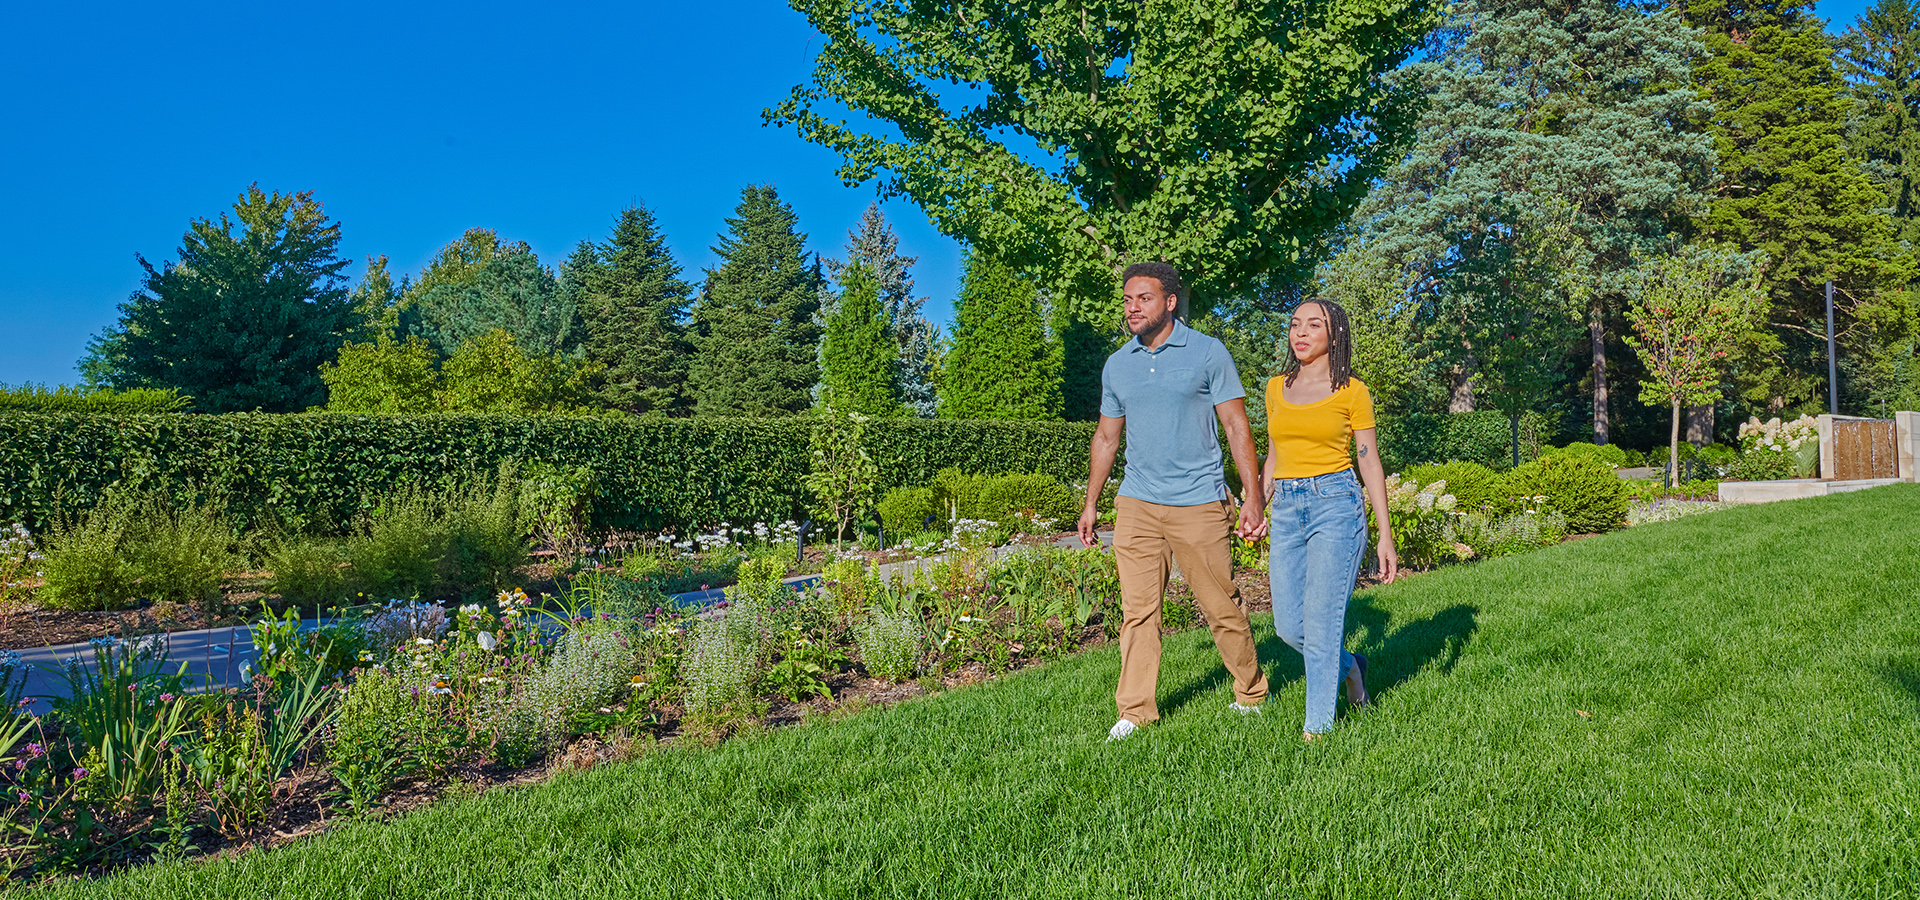 Photograph of couple walking in The Gerard T. Donnelly Grand Garden at The Morton Arboretum